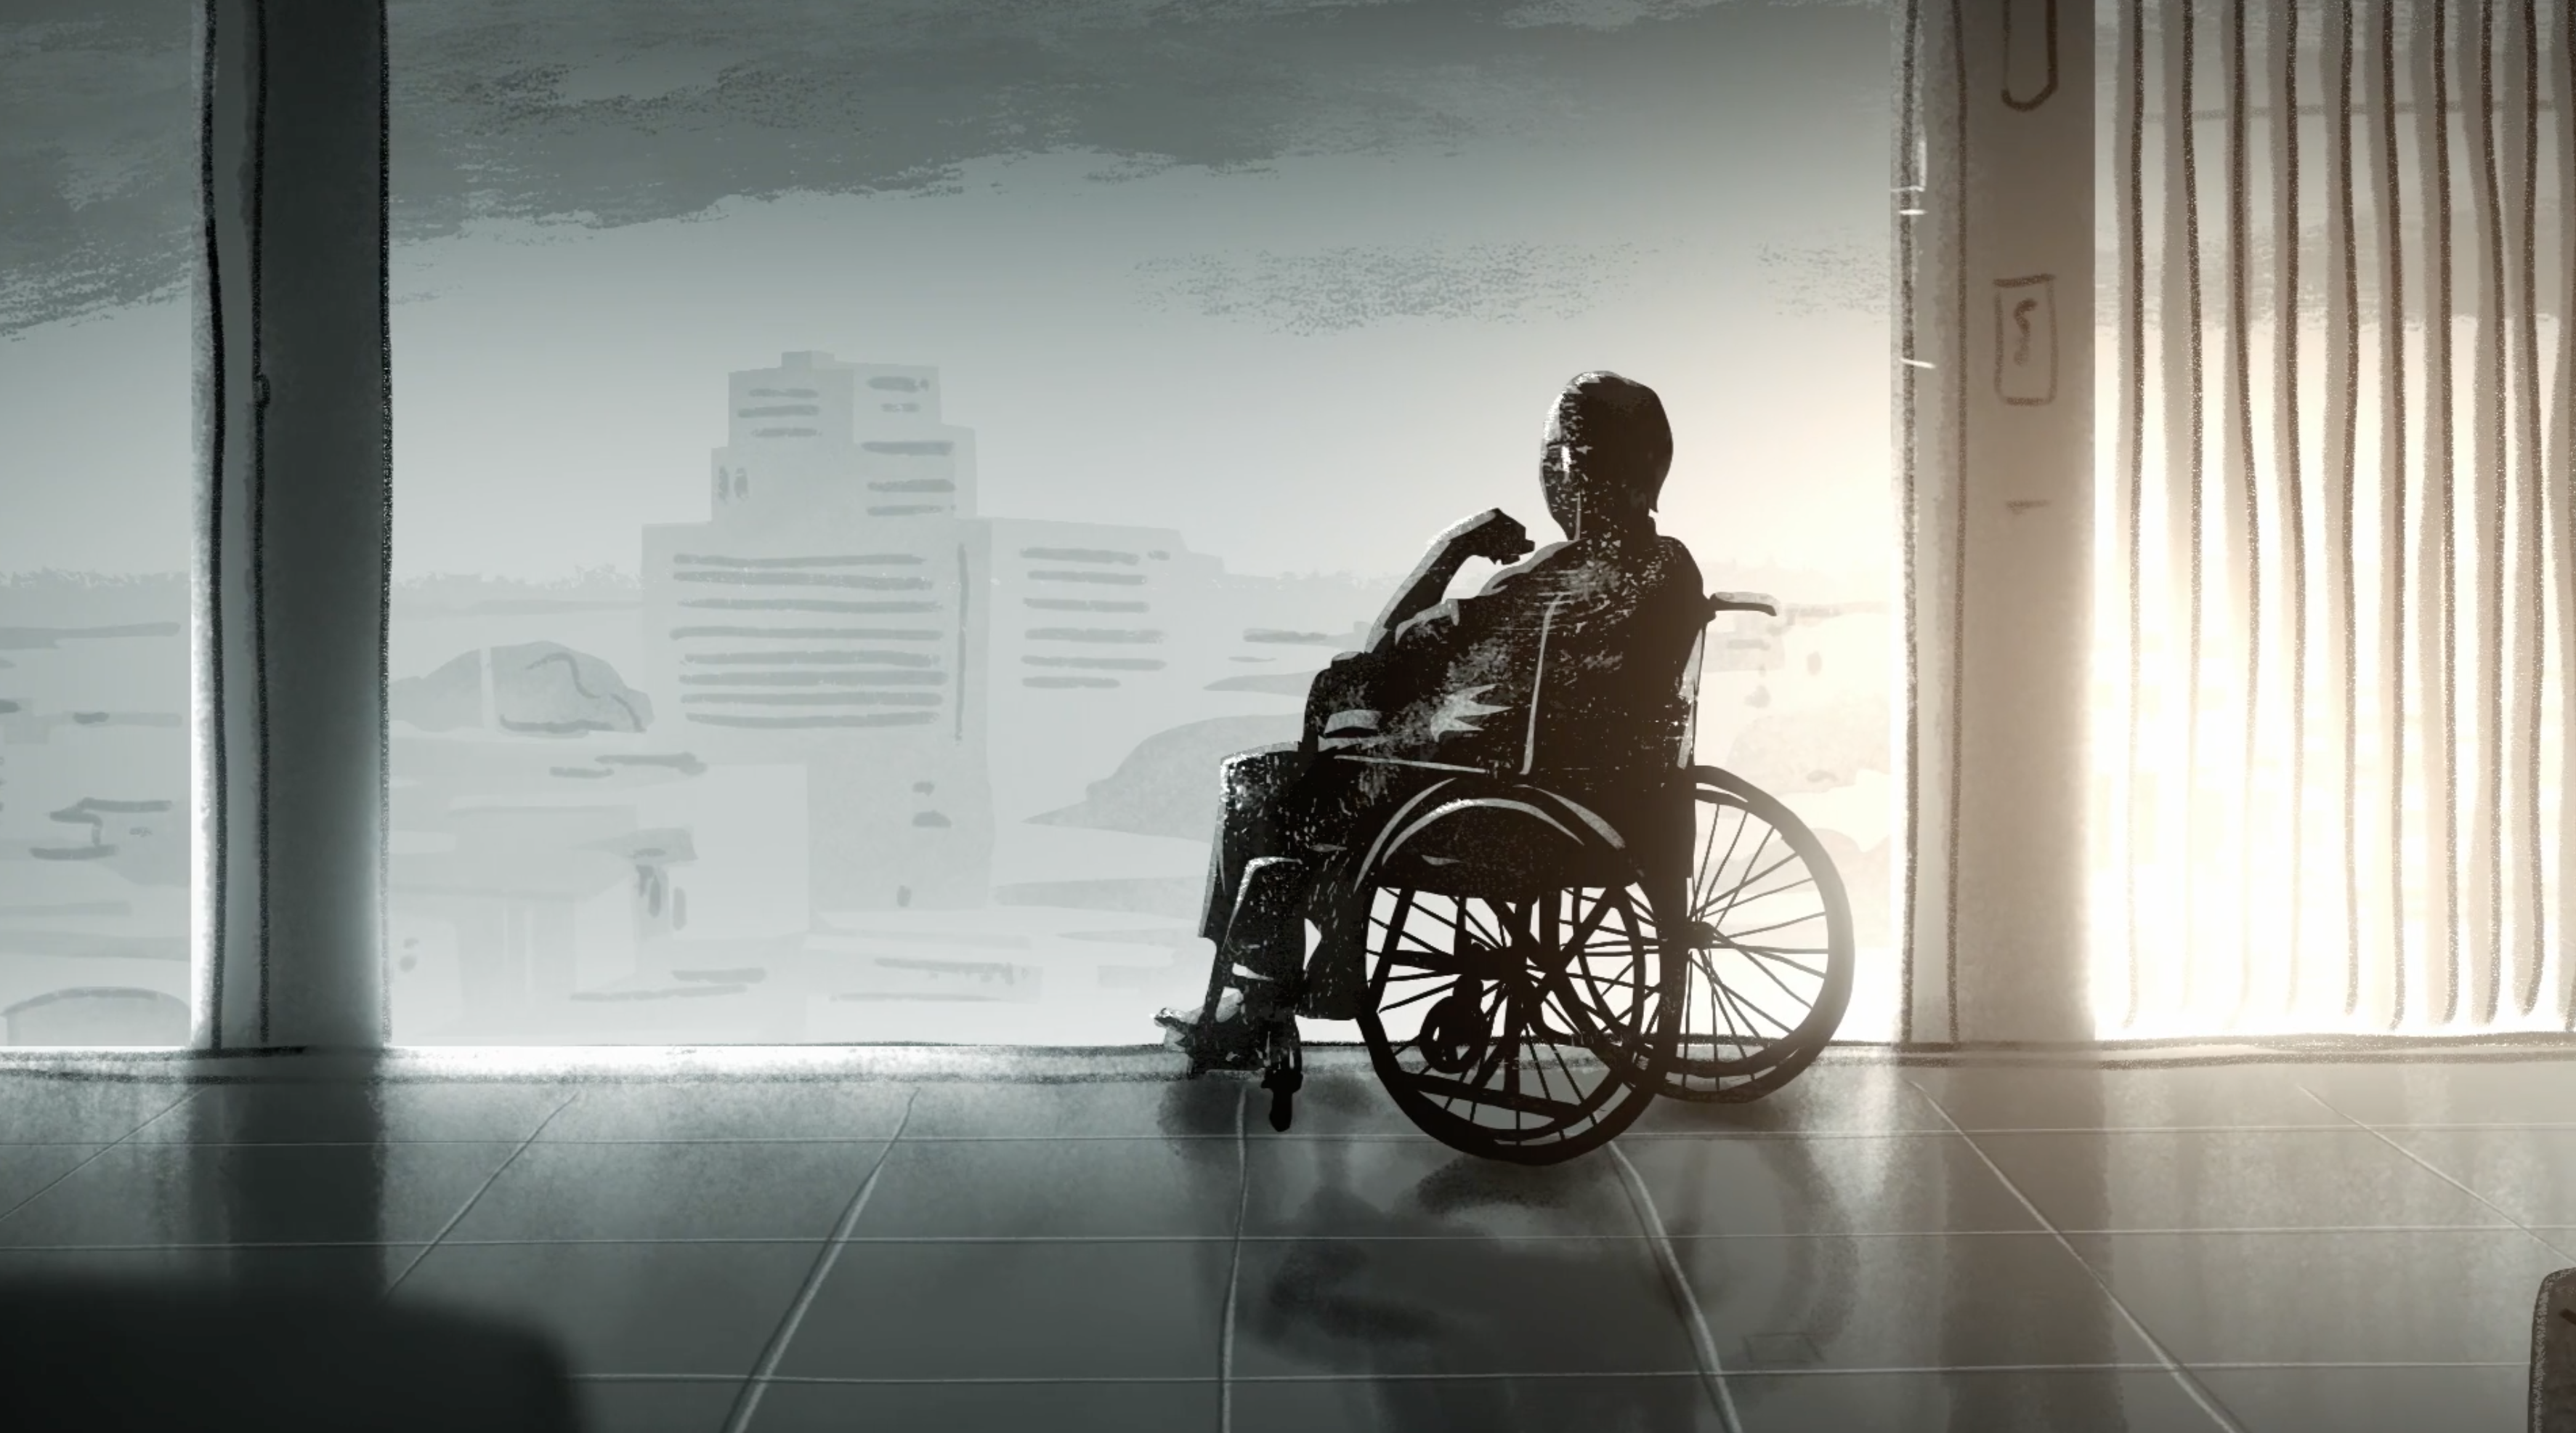 International Day of Disabled Persons – Against Strong Winds